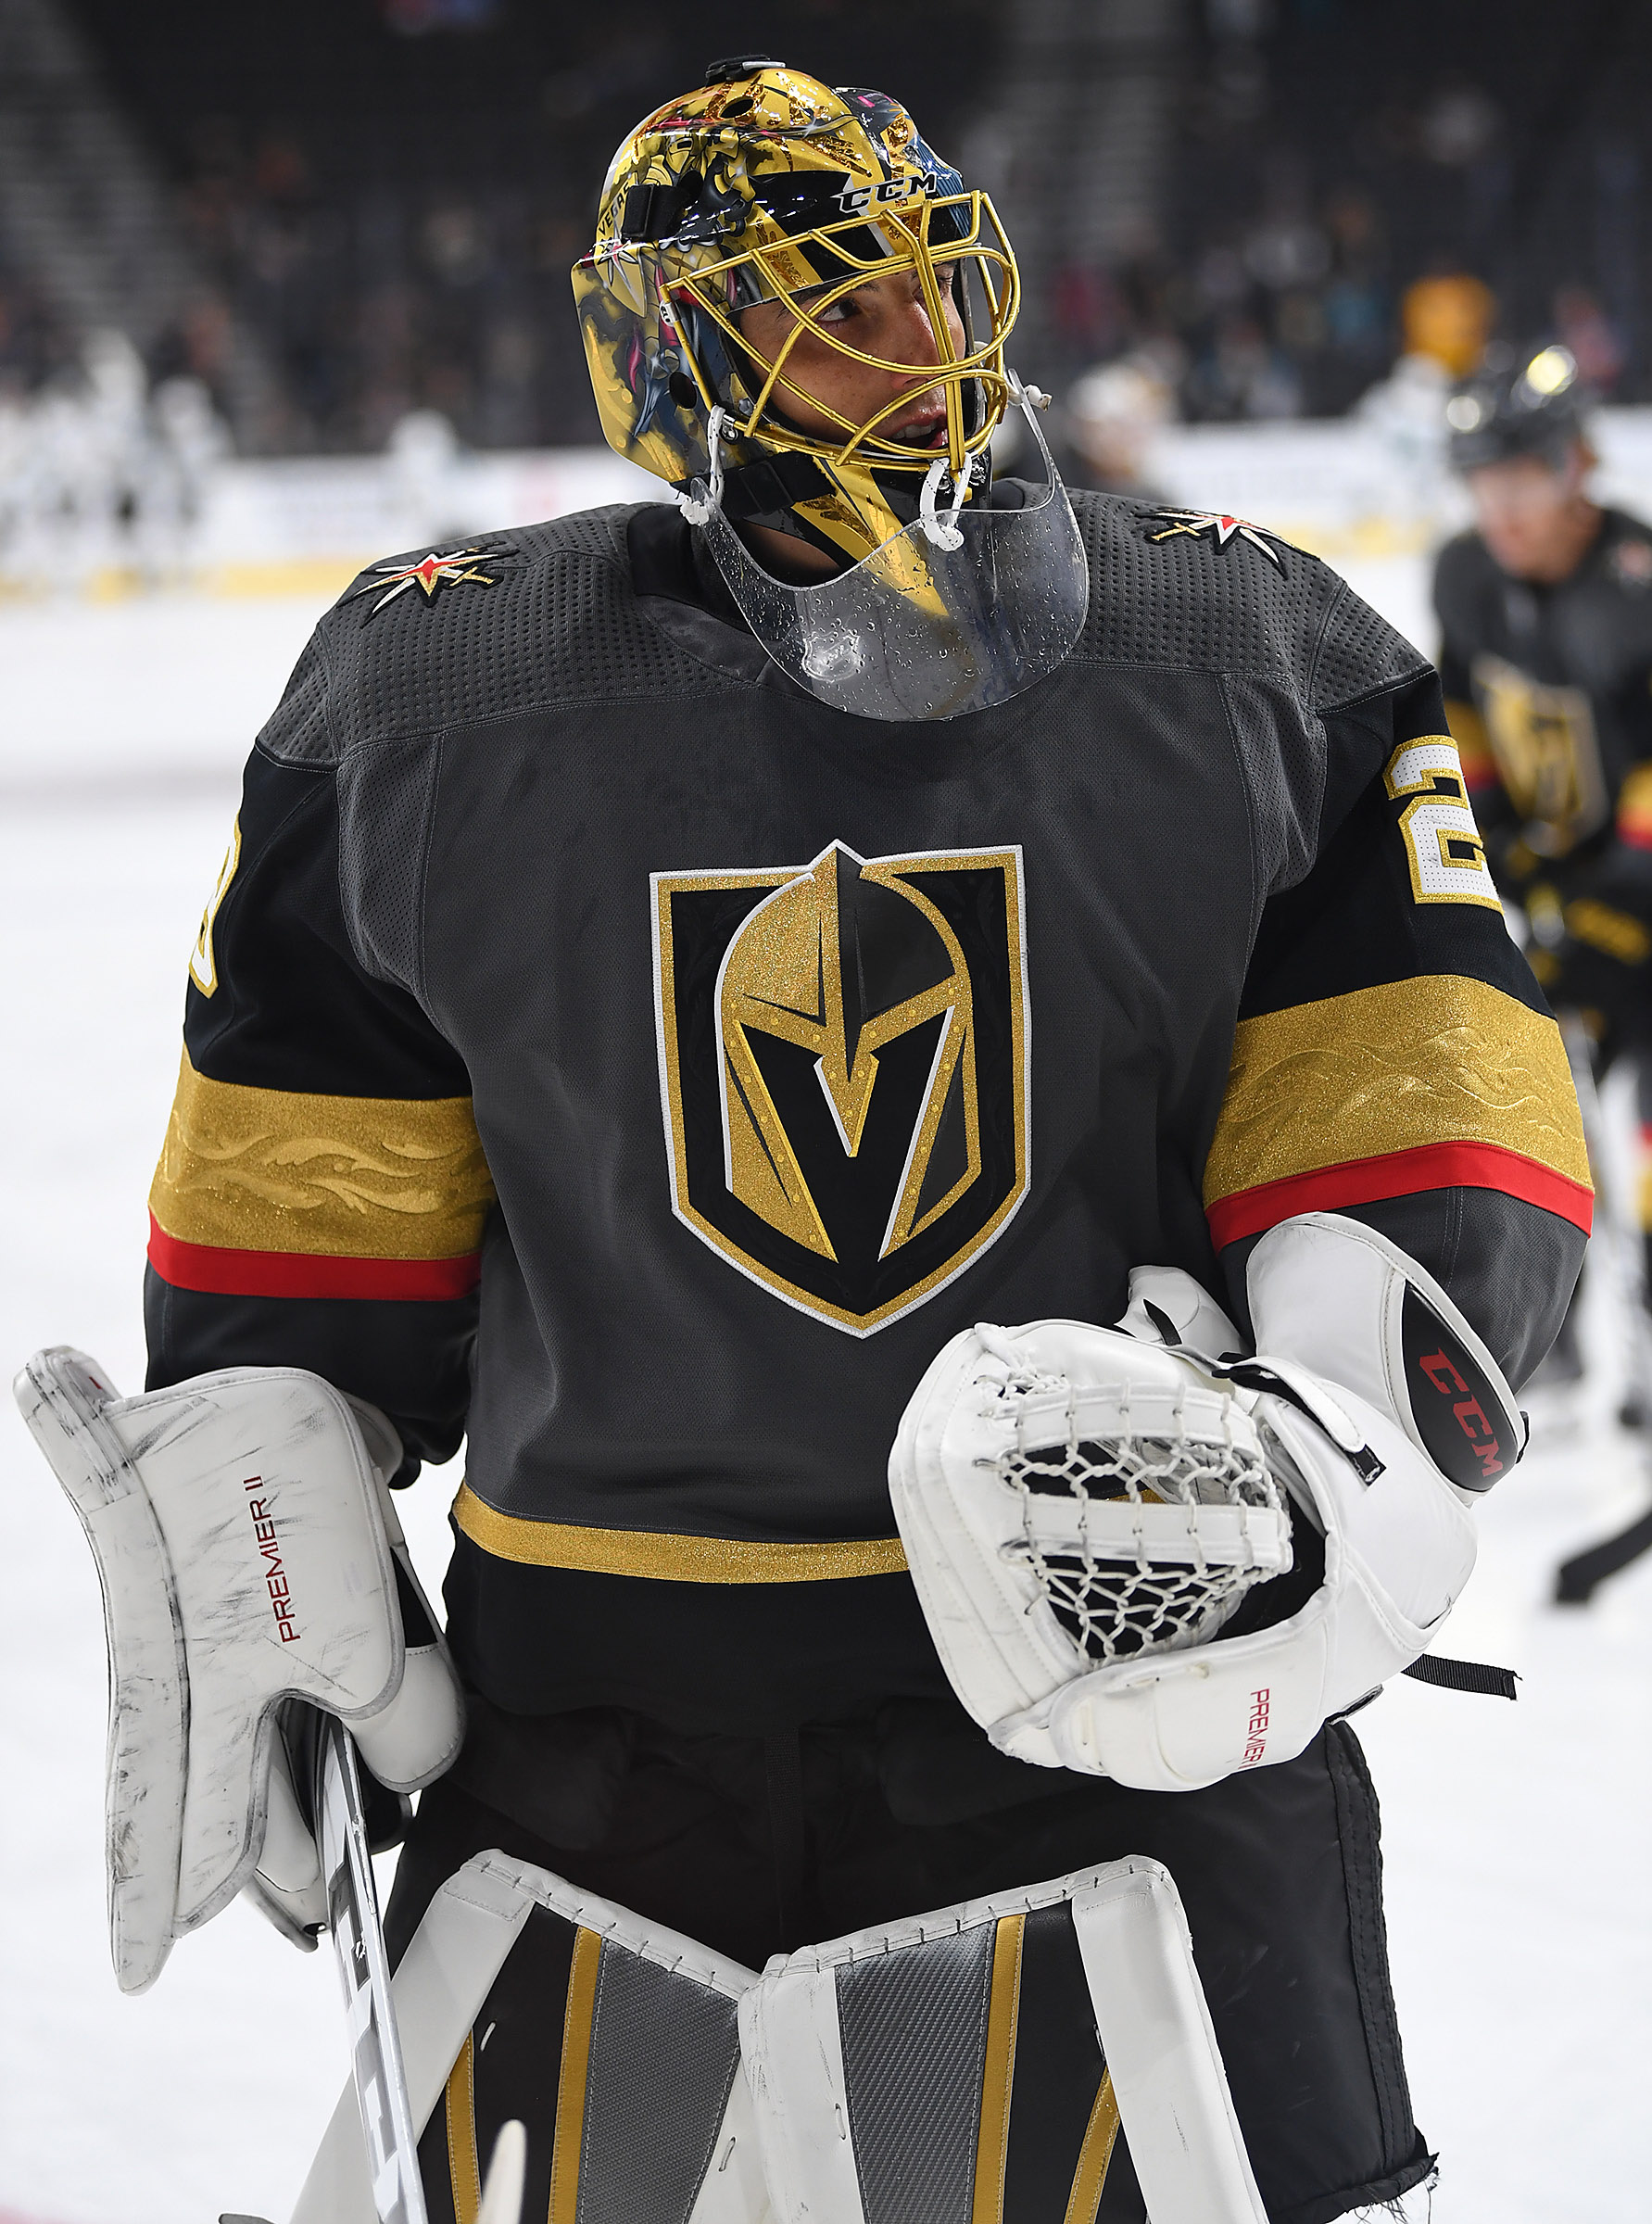 Marc-Andre Fleury says 2021-22 season 'could be' his last in NHL